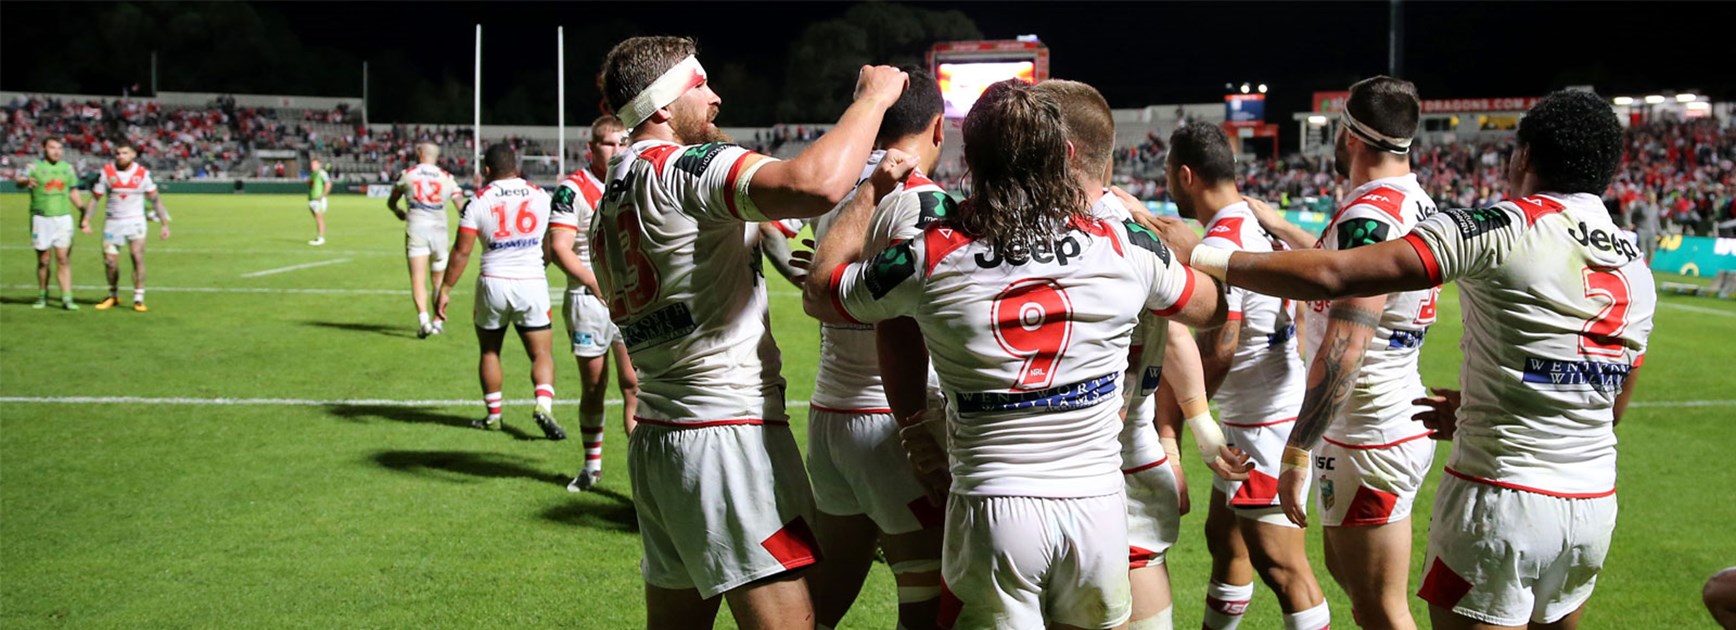 The Dragons celebrate Euan Aitken's match-winning try against Canberra in Round 10.